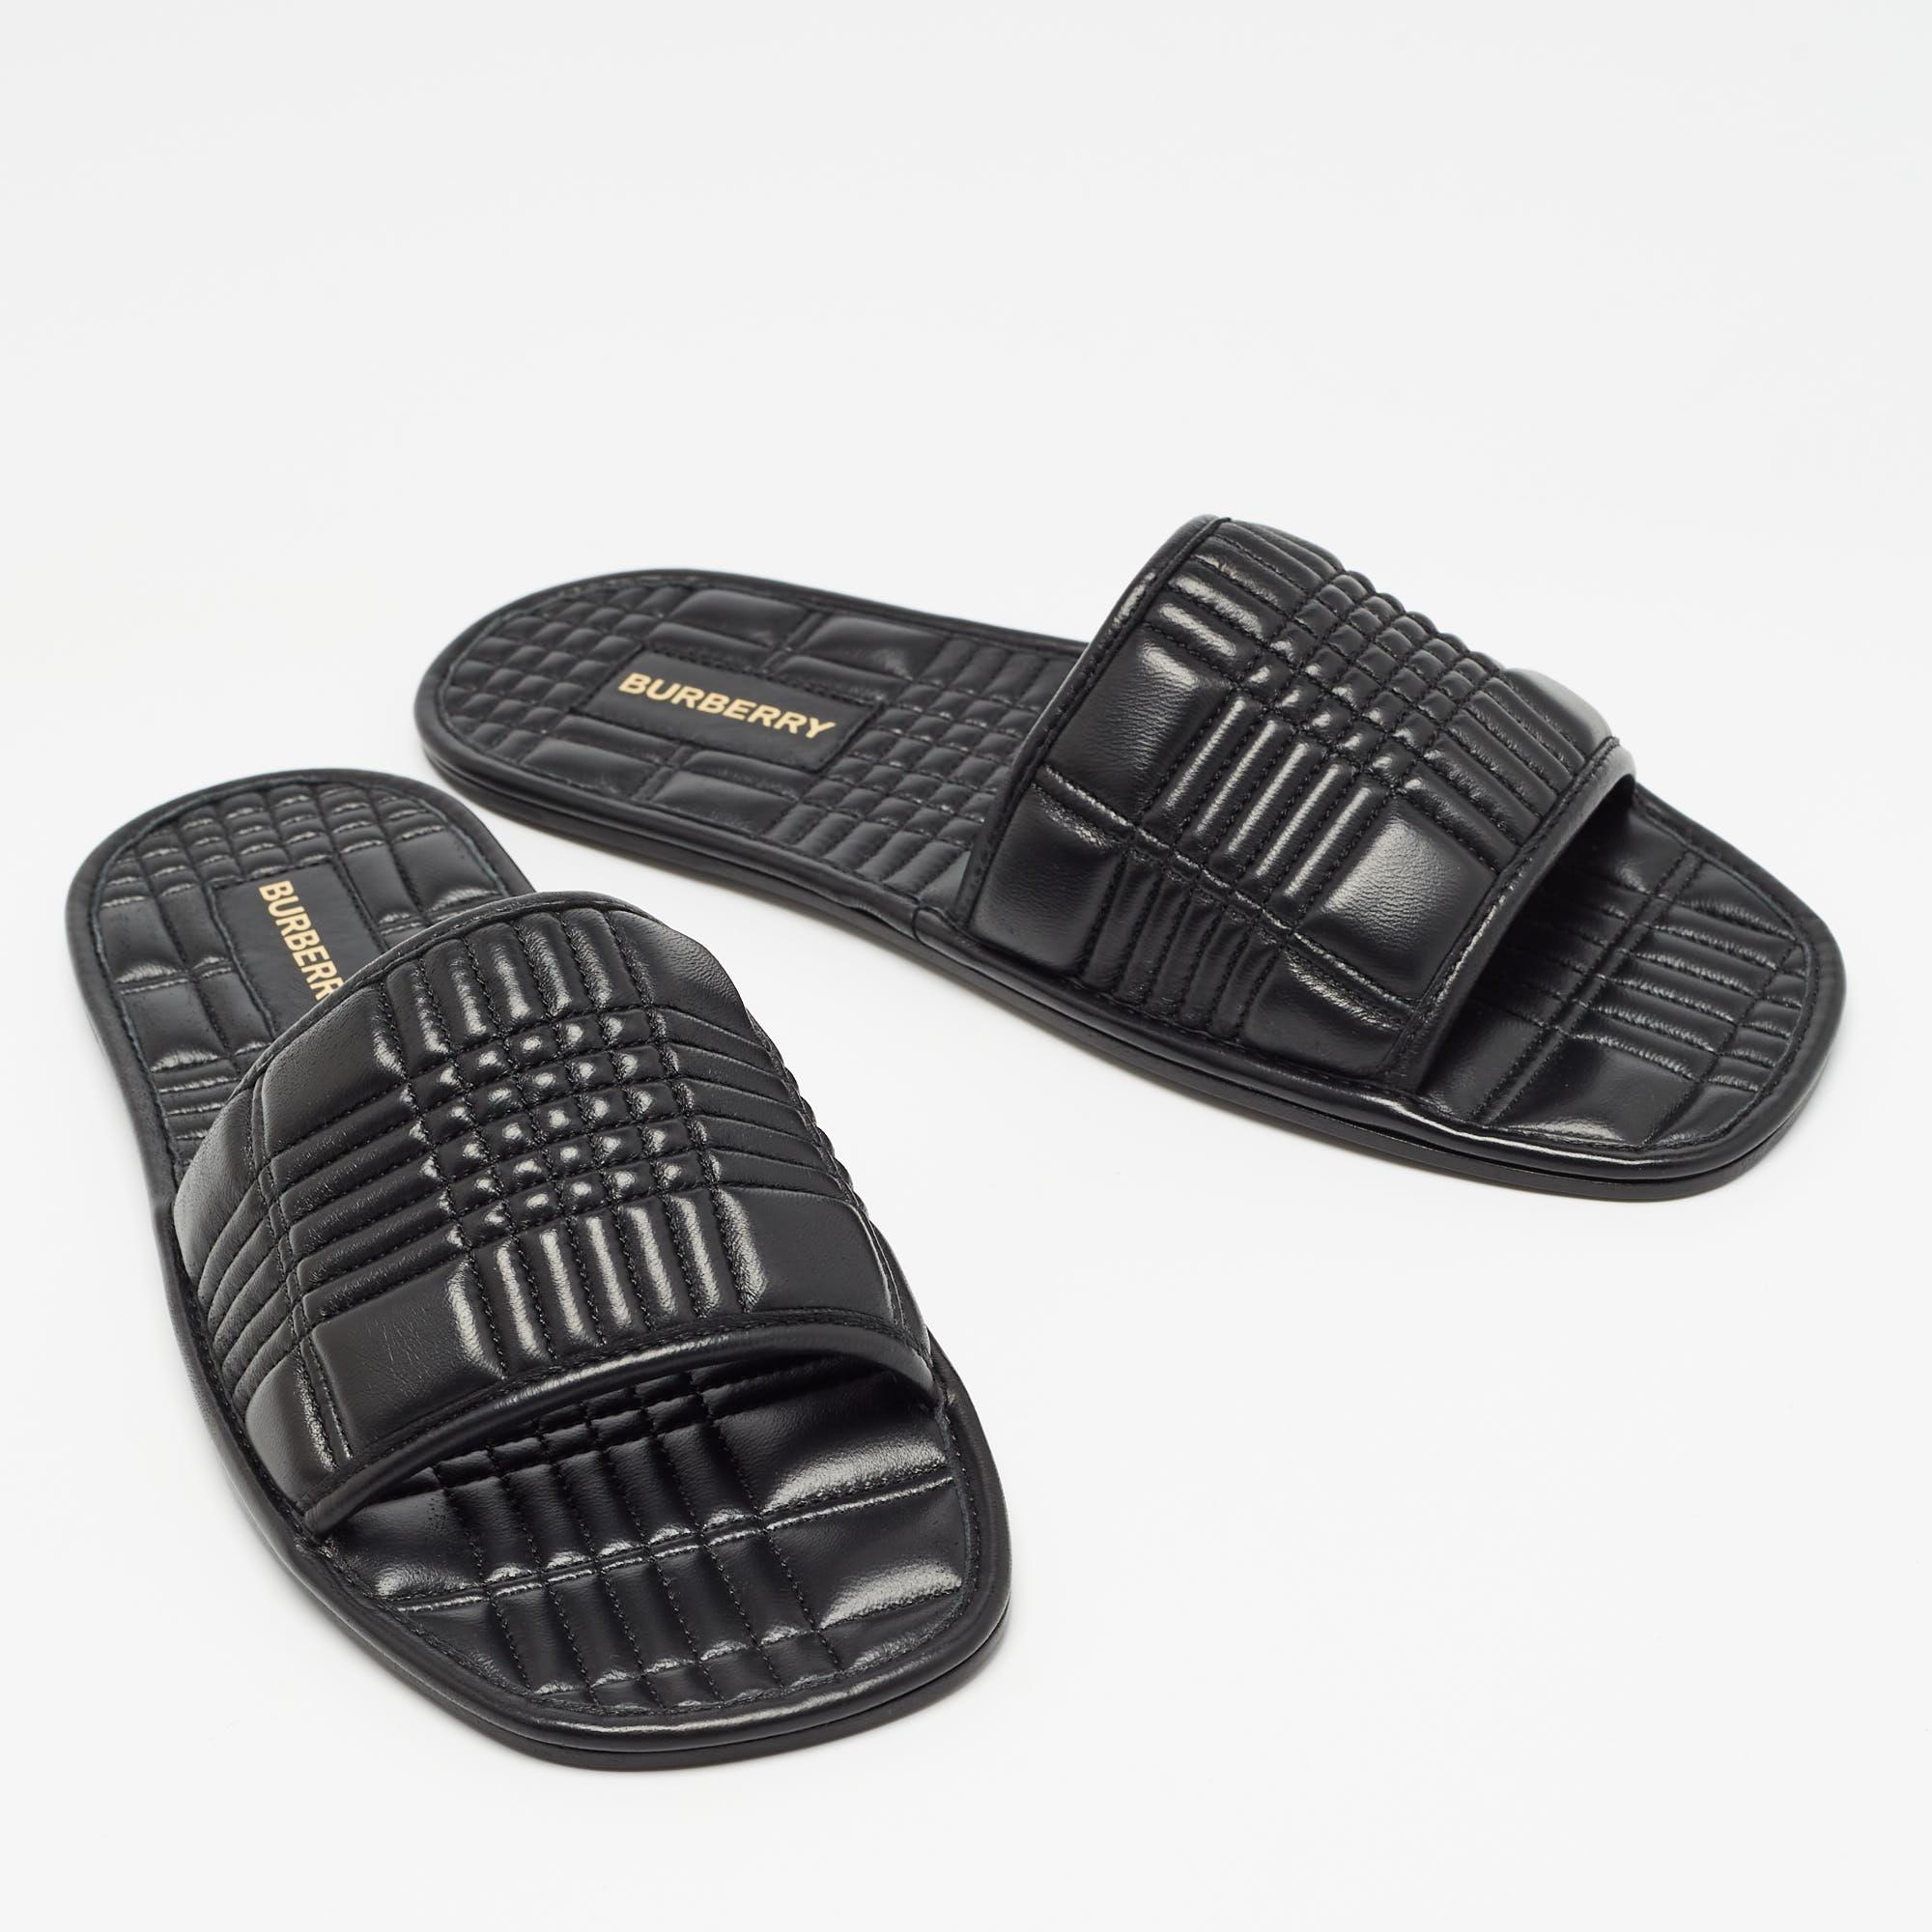 Burberry Black Quilted Leather Alixa Flat Slides Size 38 1